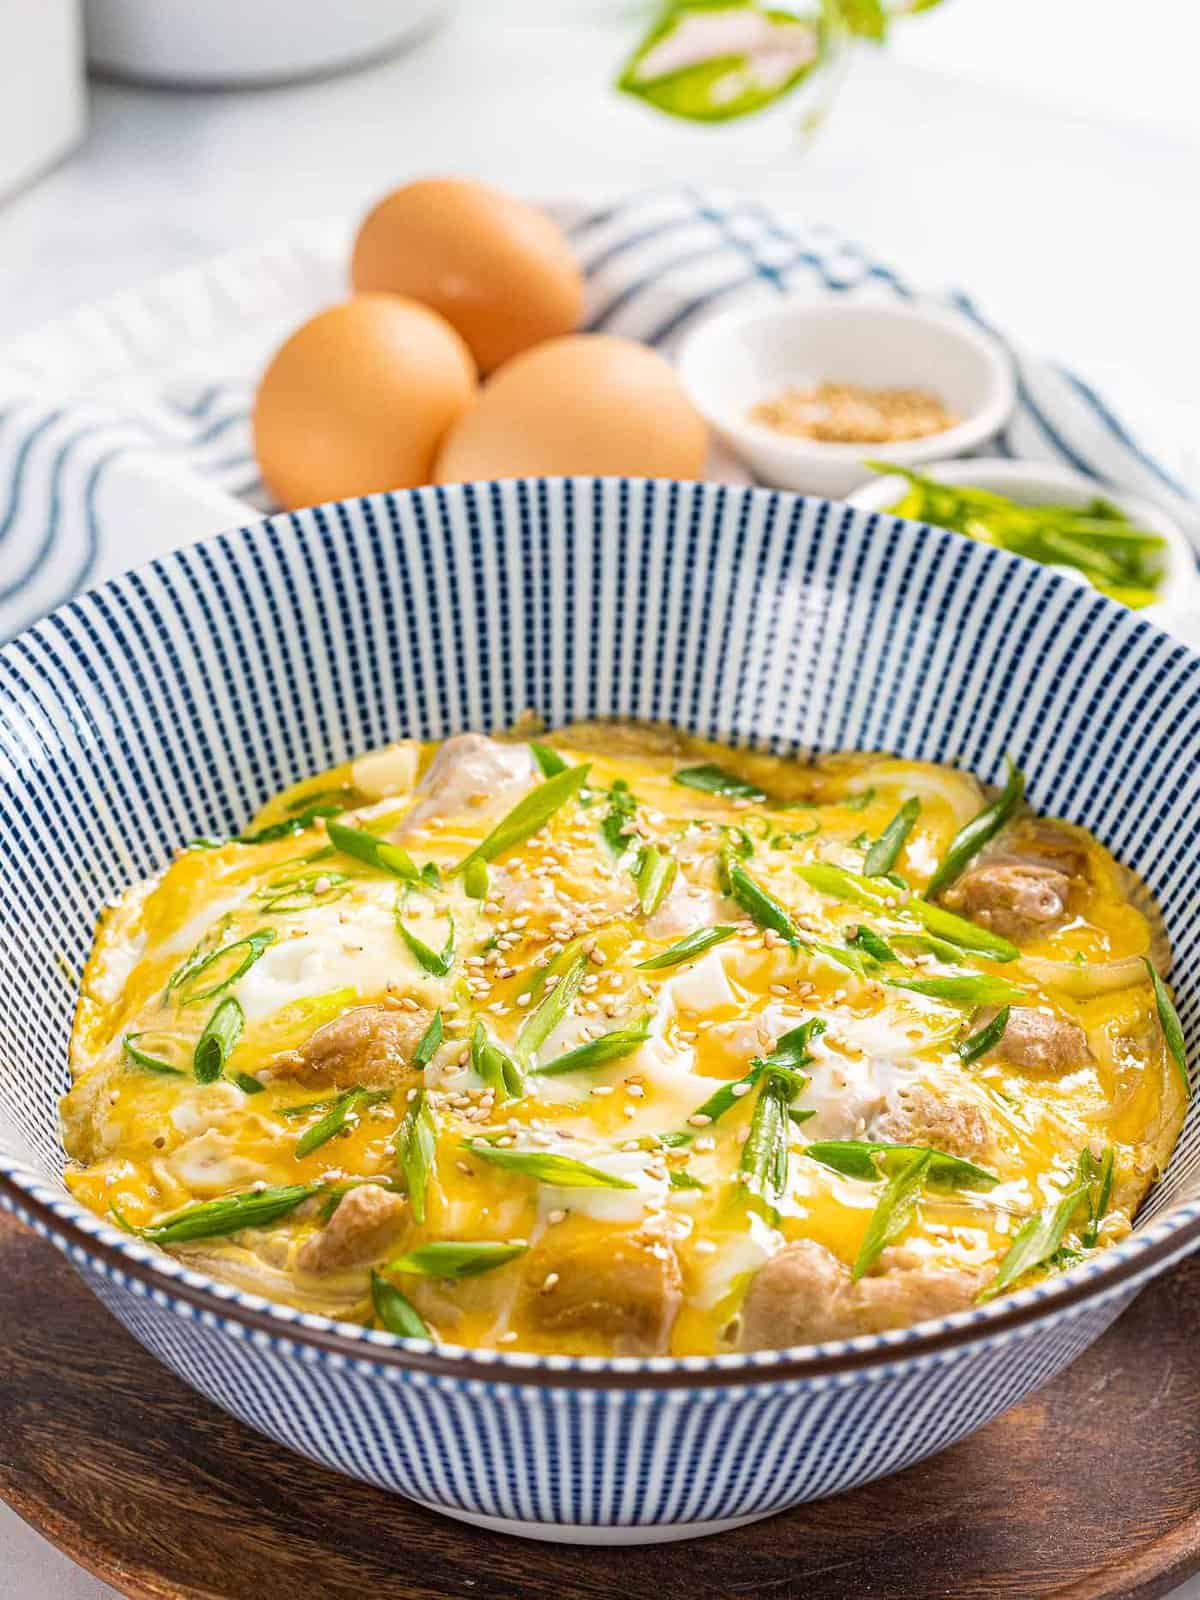 Oyakodon or Japanese chicken and egg rice bowl garnished with green onions.